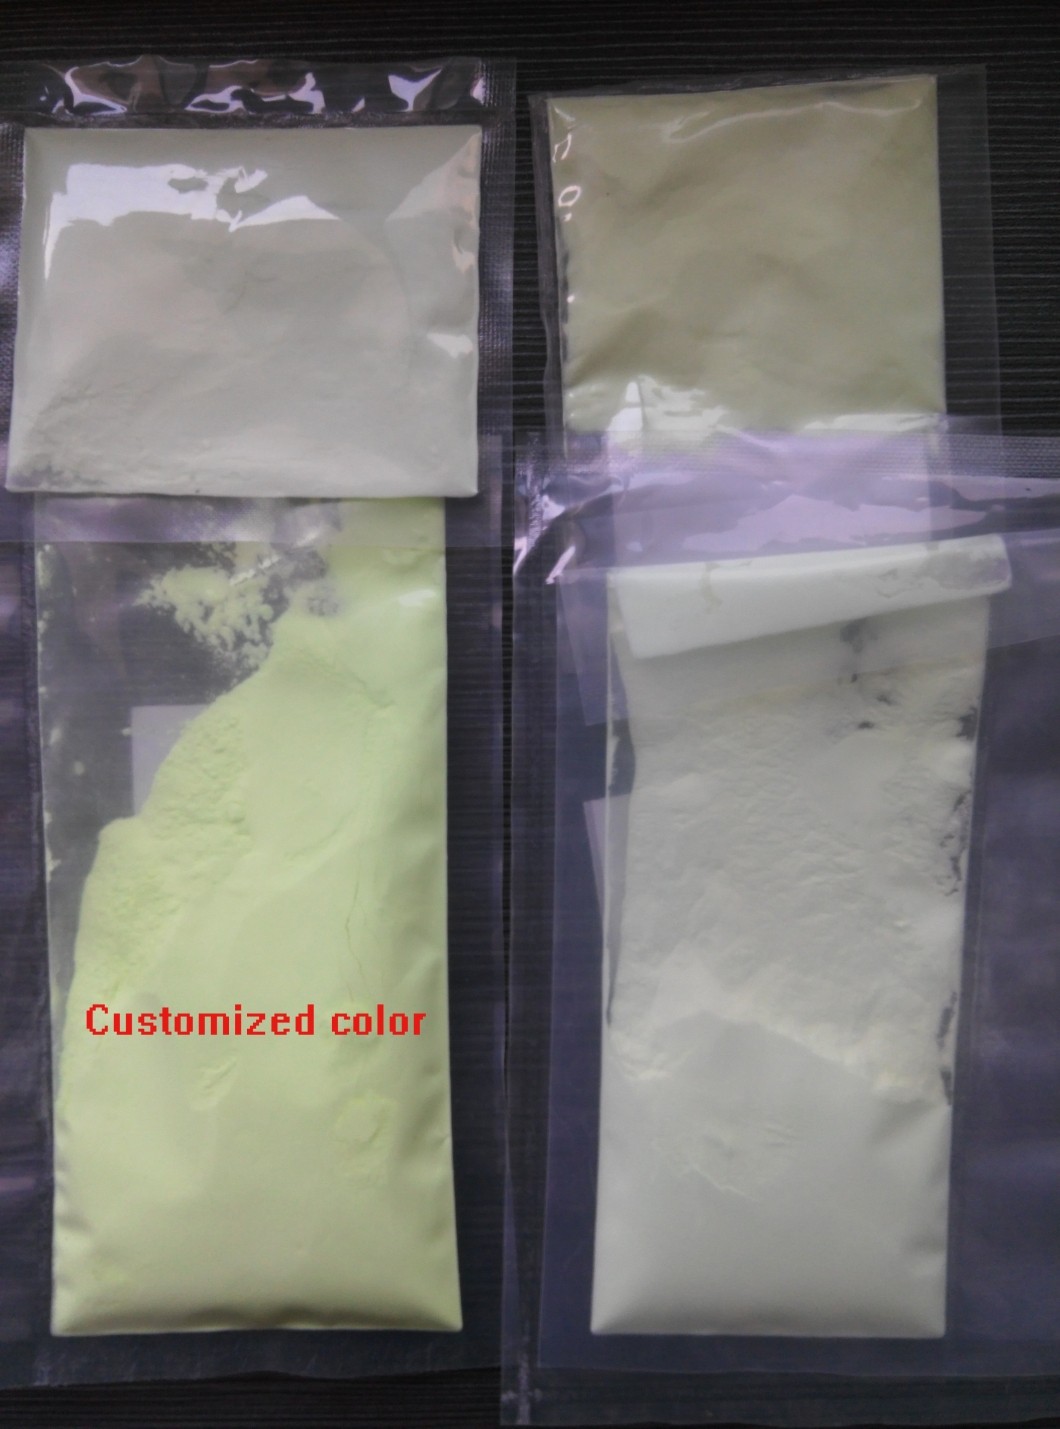 Can the surface color of Photoluminescent pigment be more green?